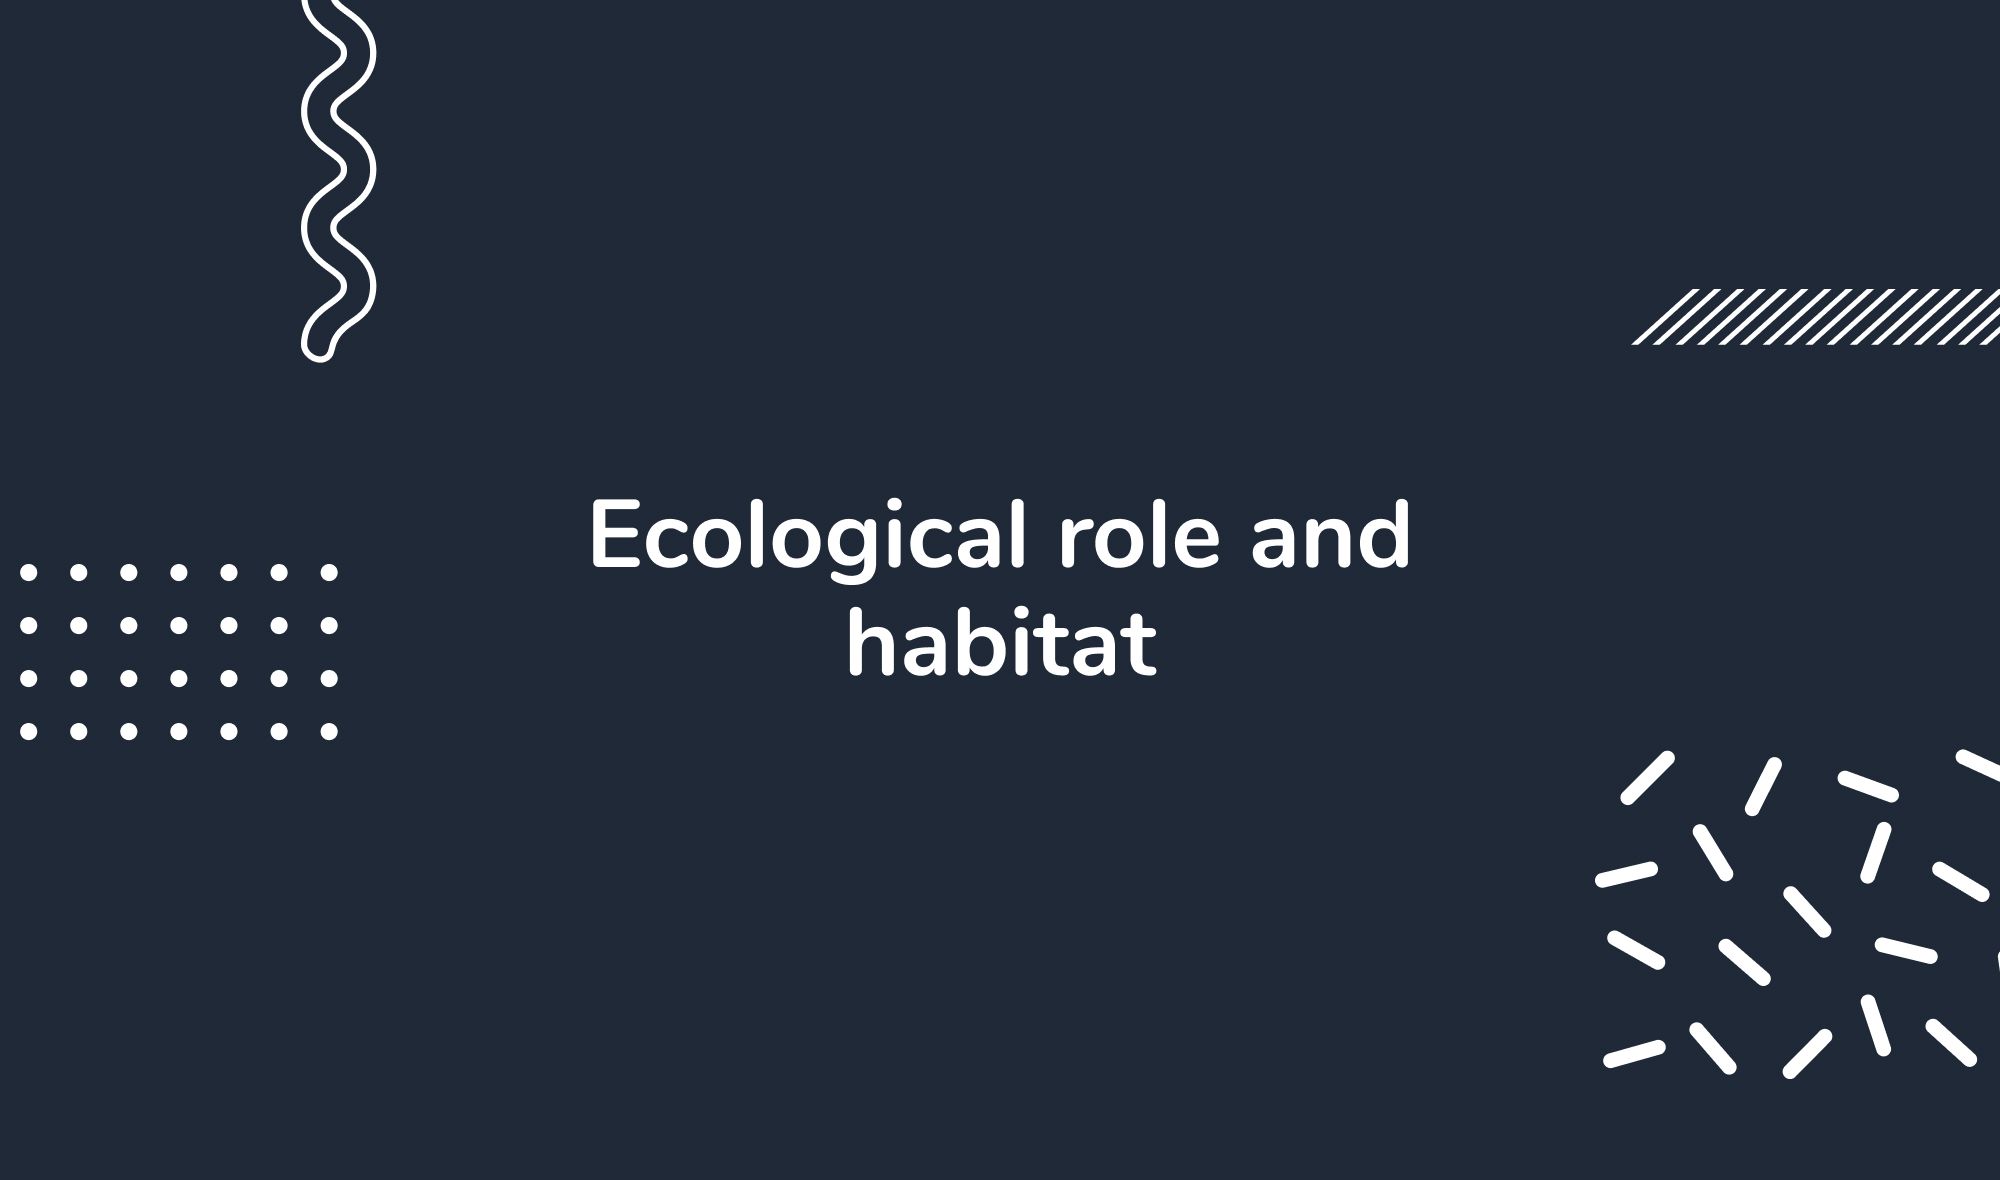 Ecological role and habitat